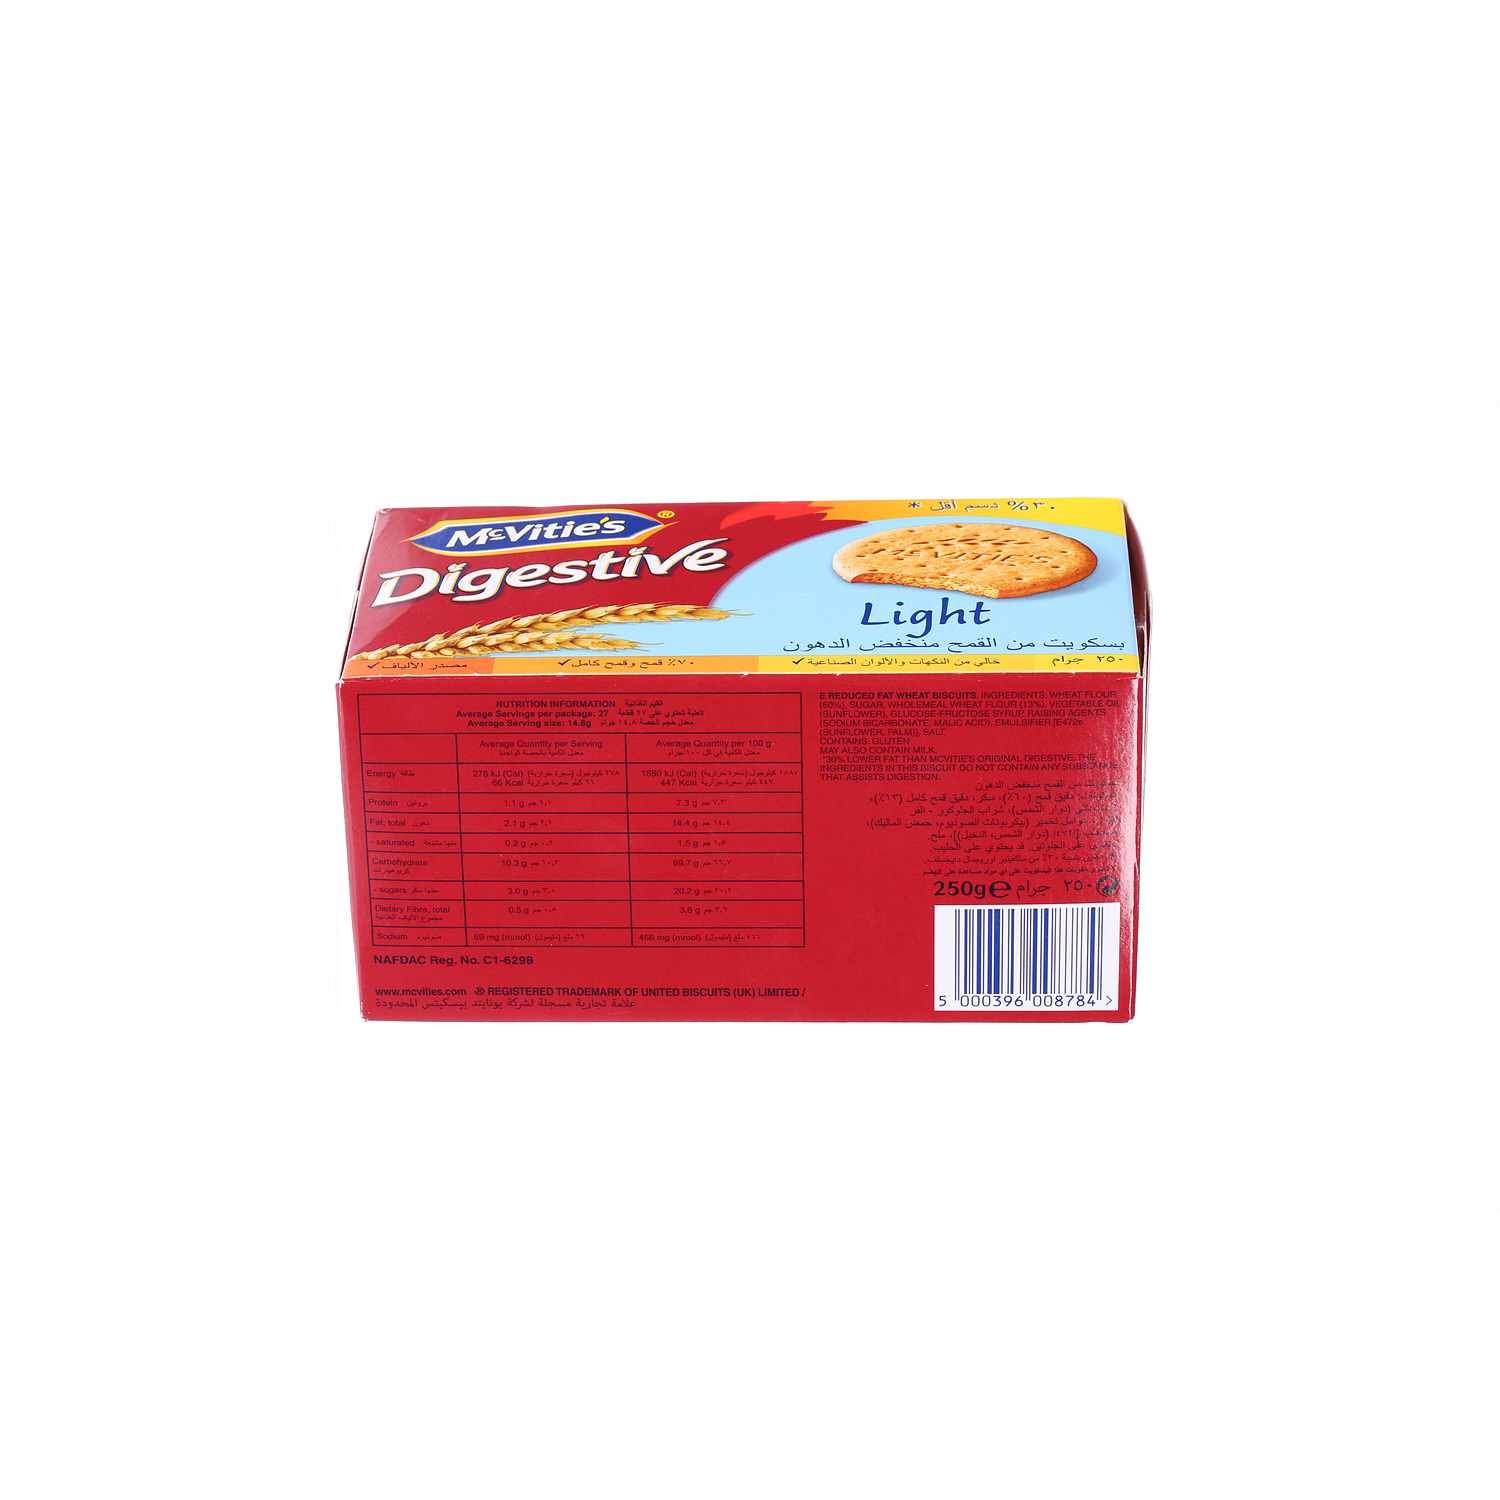 Mcvities Digestive Light Biscuits 250gm